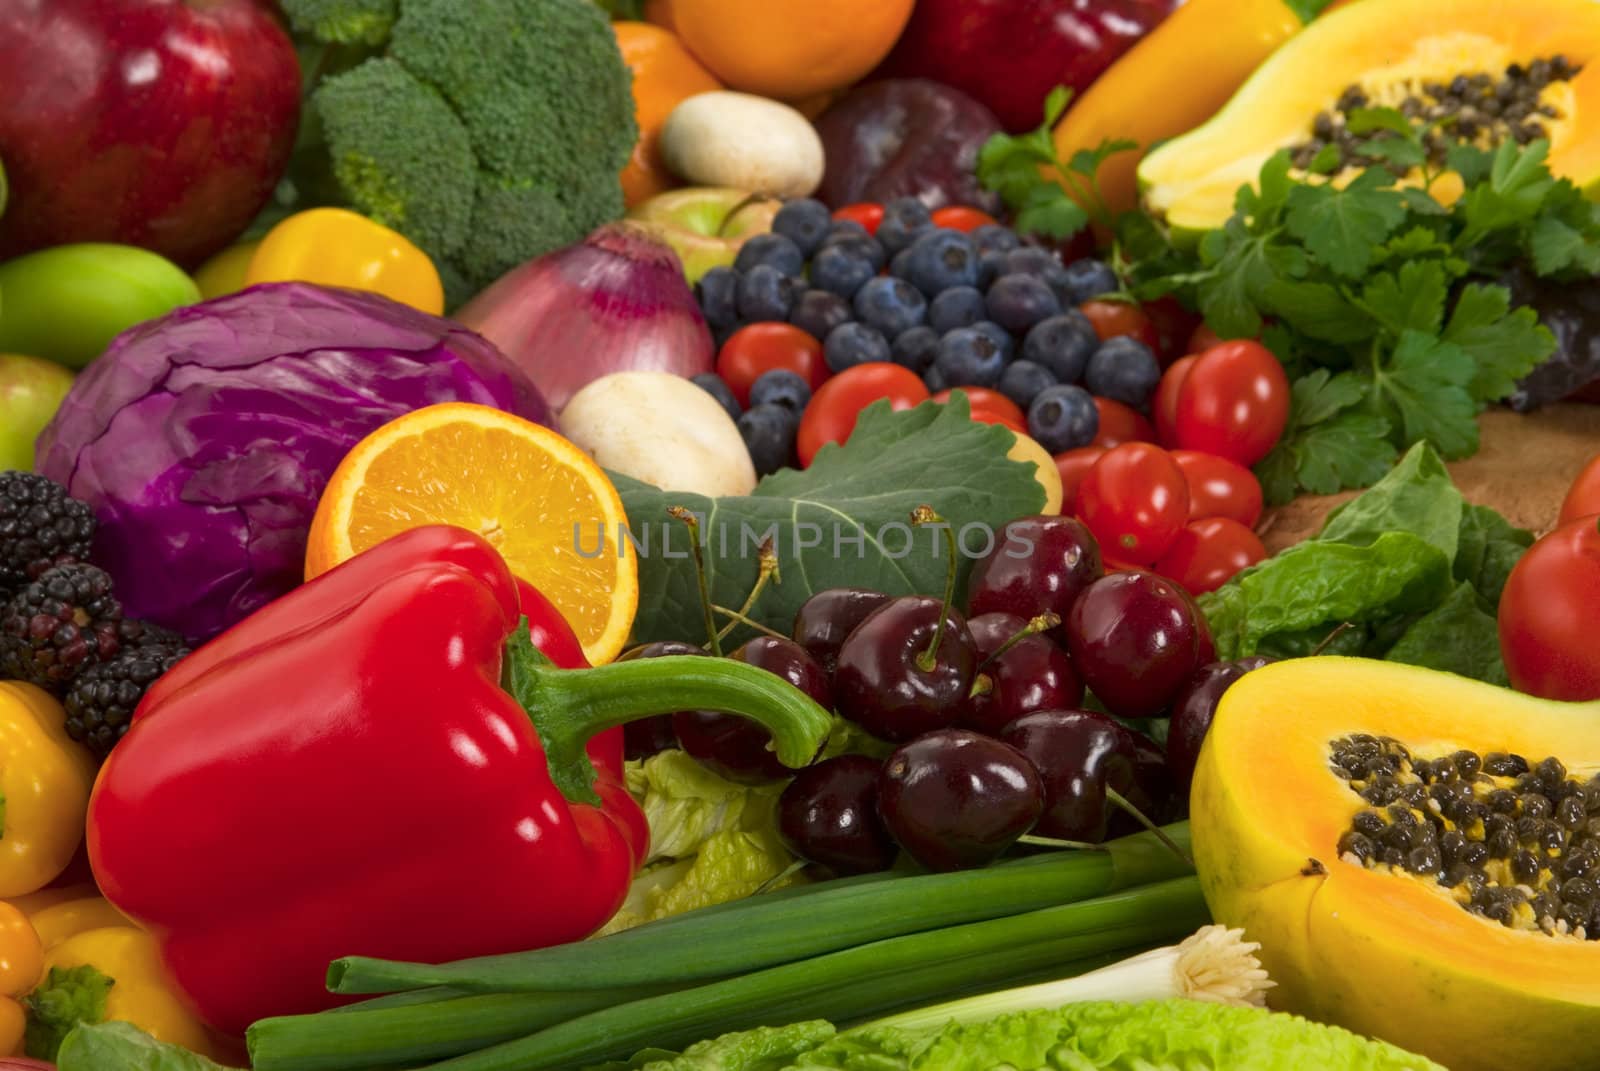 Organic vegatables and fruits